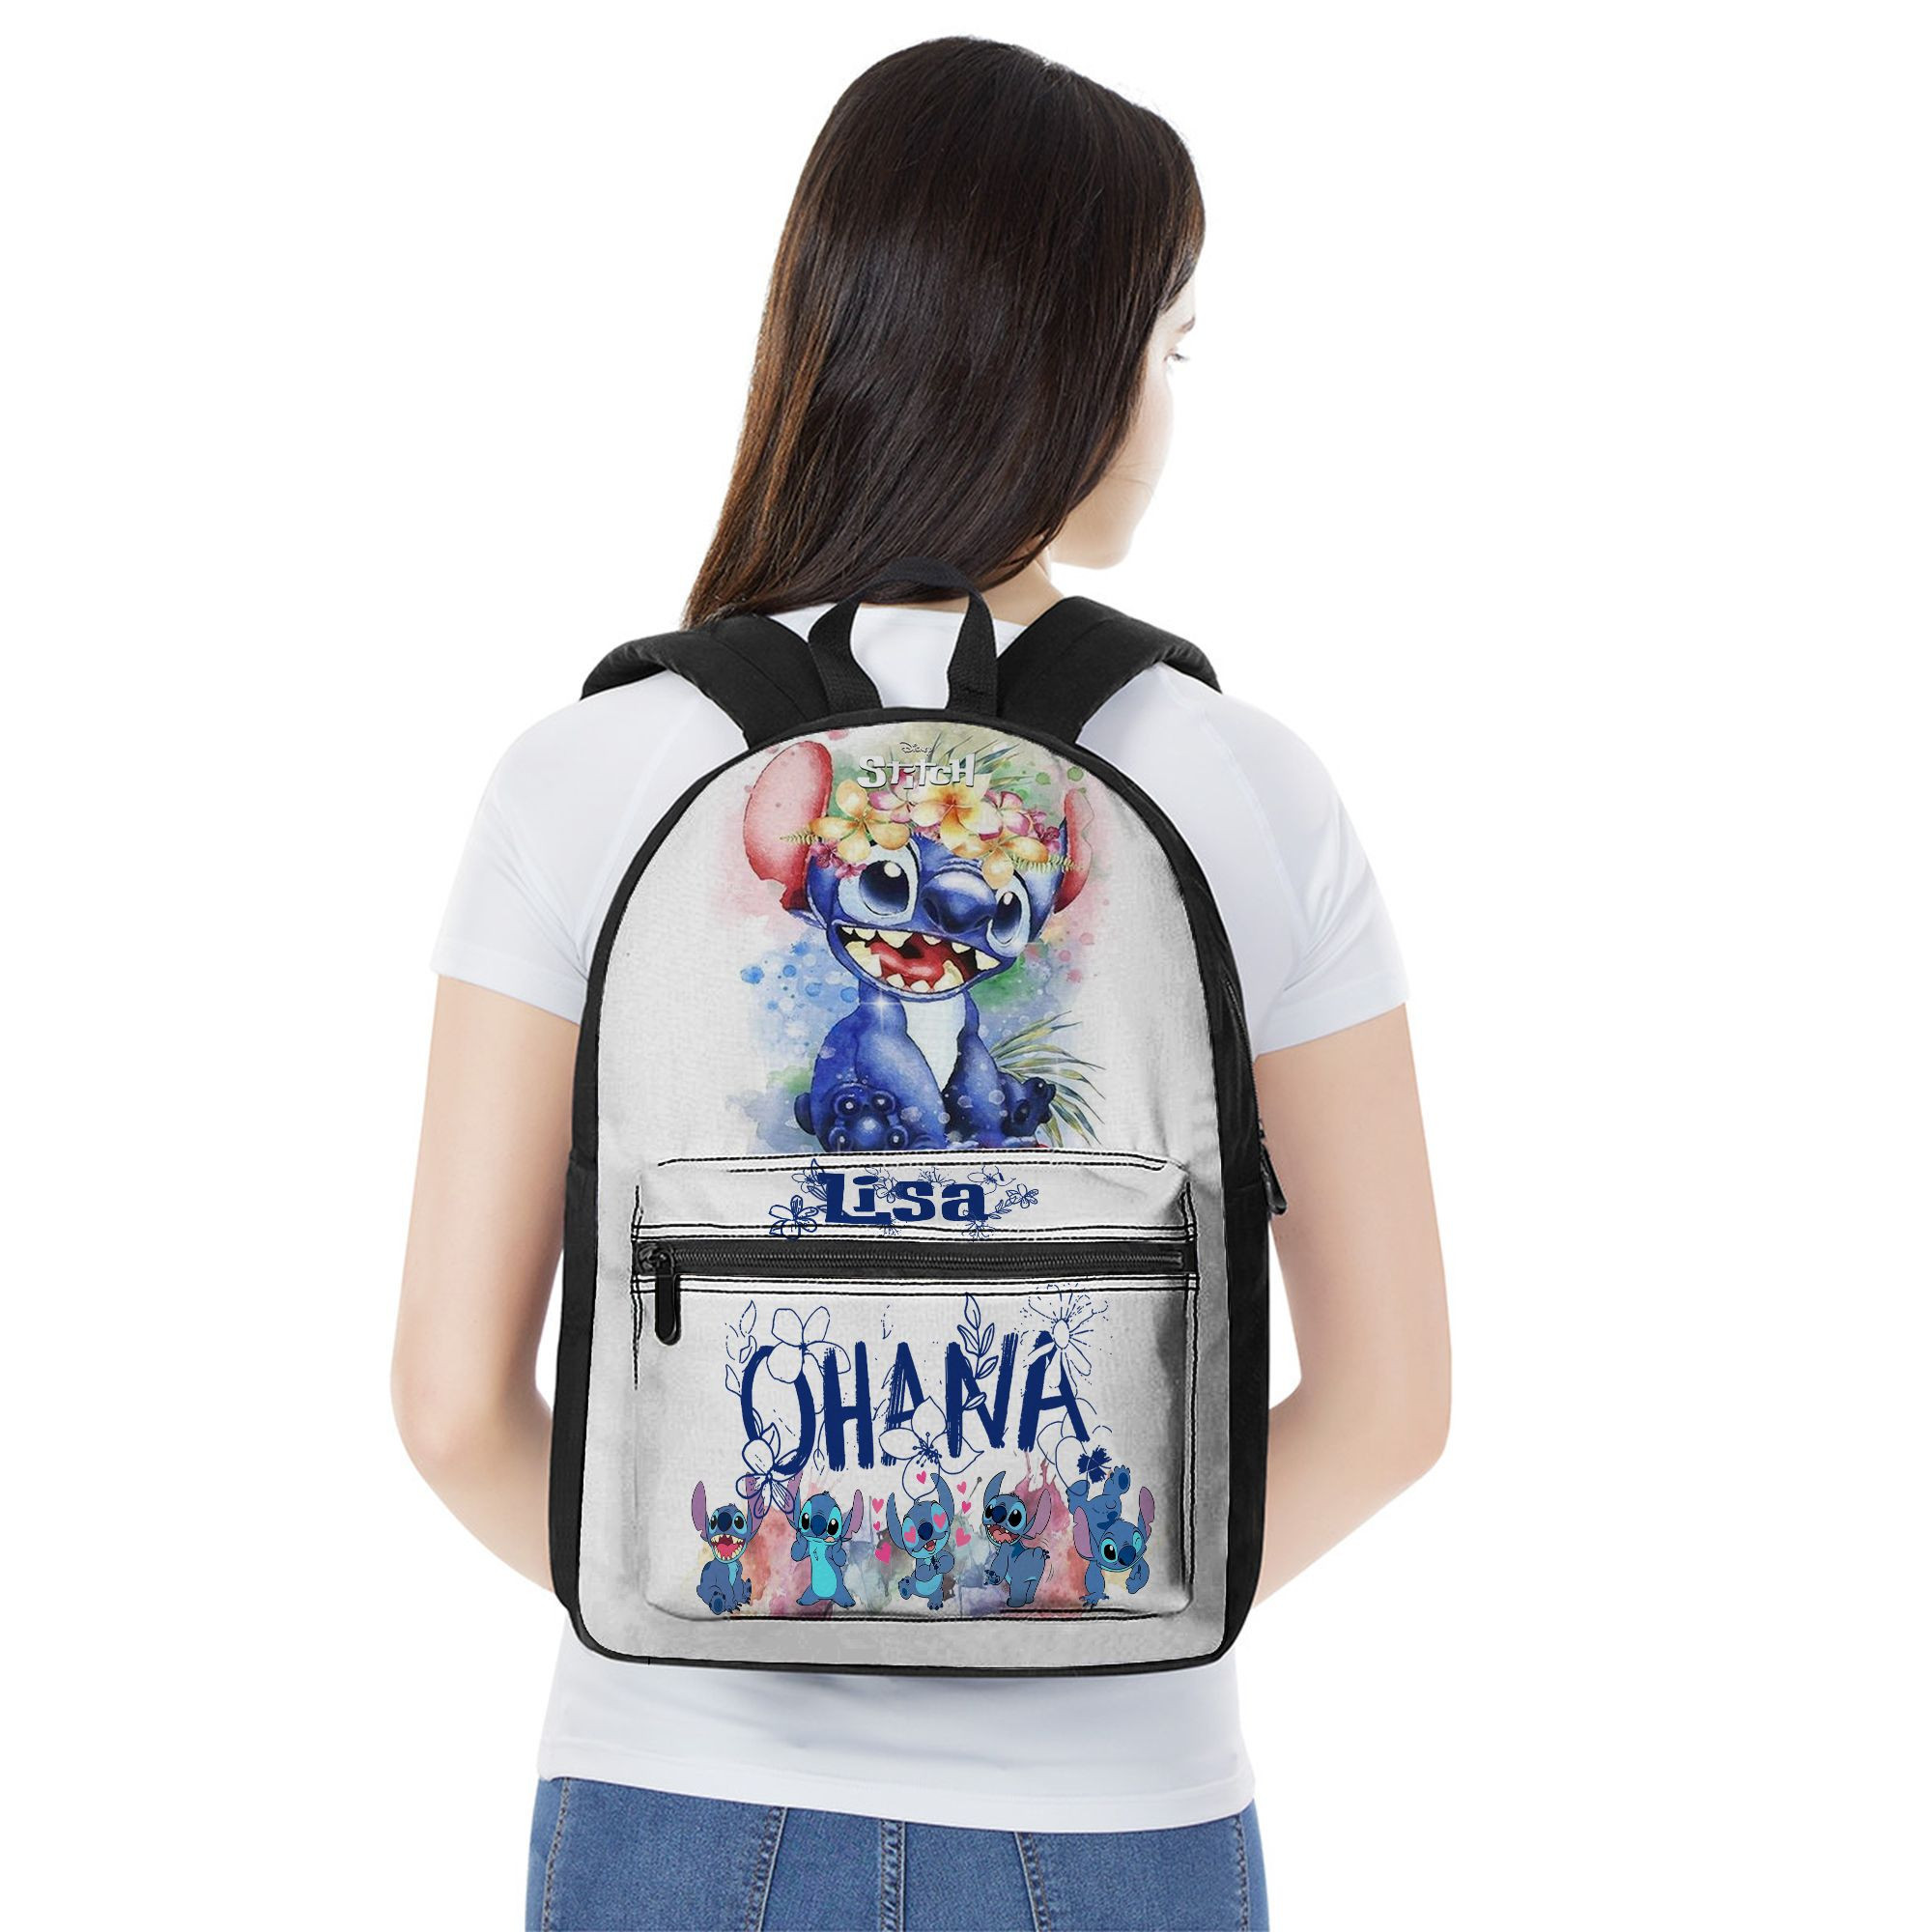 LIST 400 PERSONALIZED BACKPACK